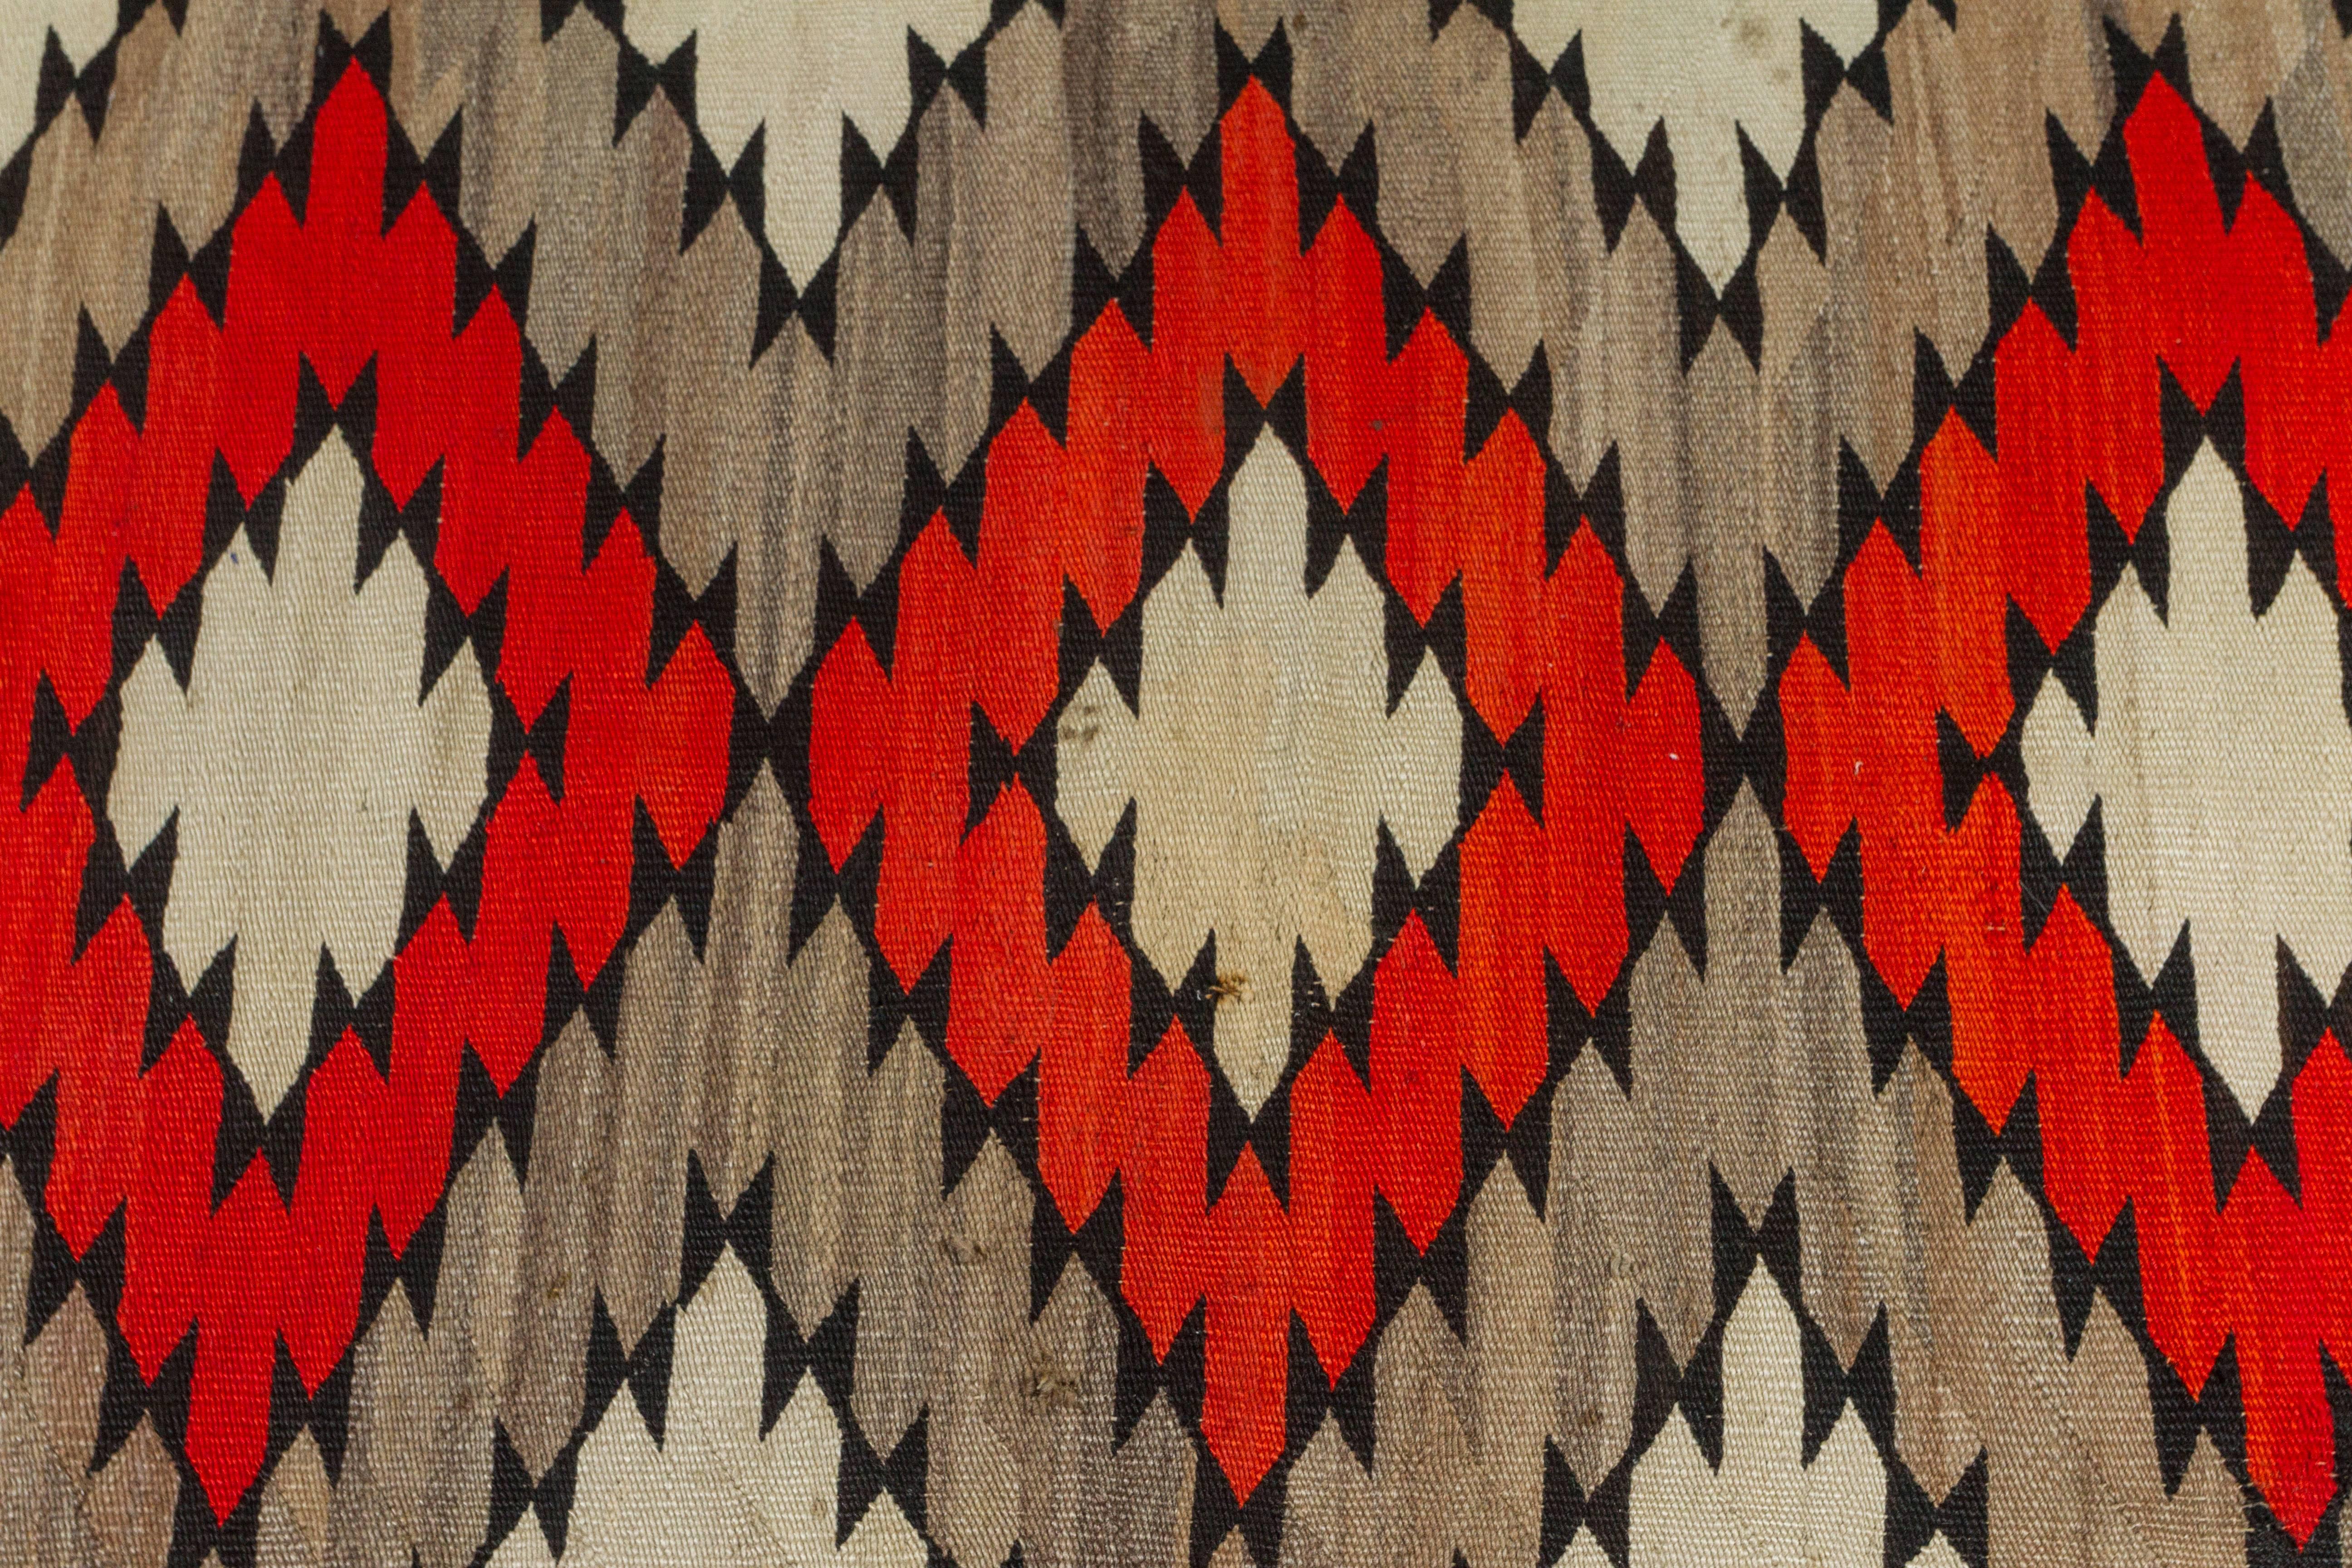 Naturally dyed wool eyedazzler Navajo blanket/rug. Made in North America circa 1920s.